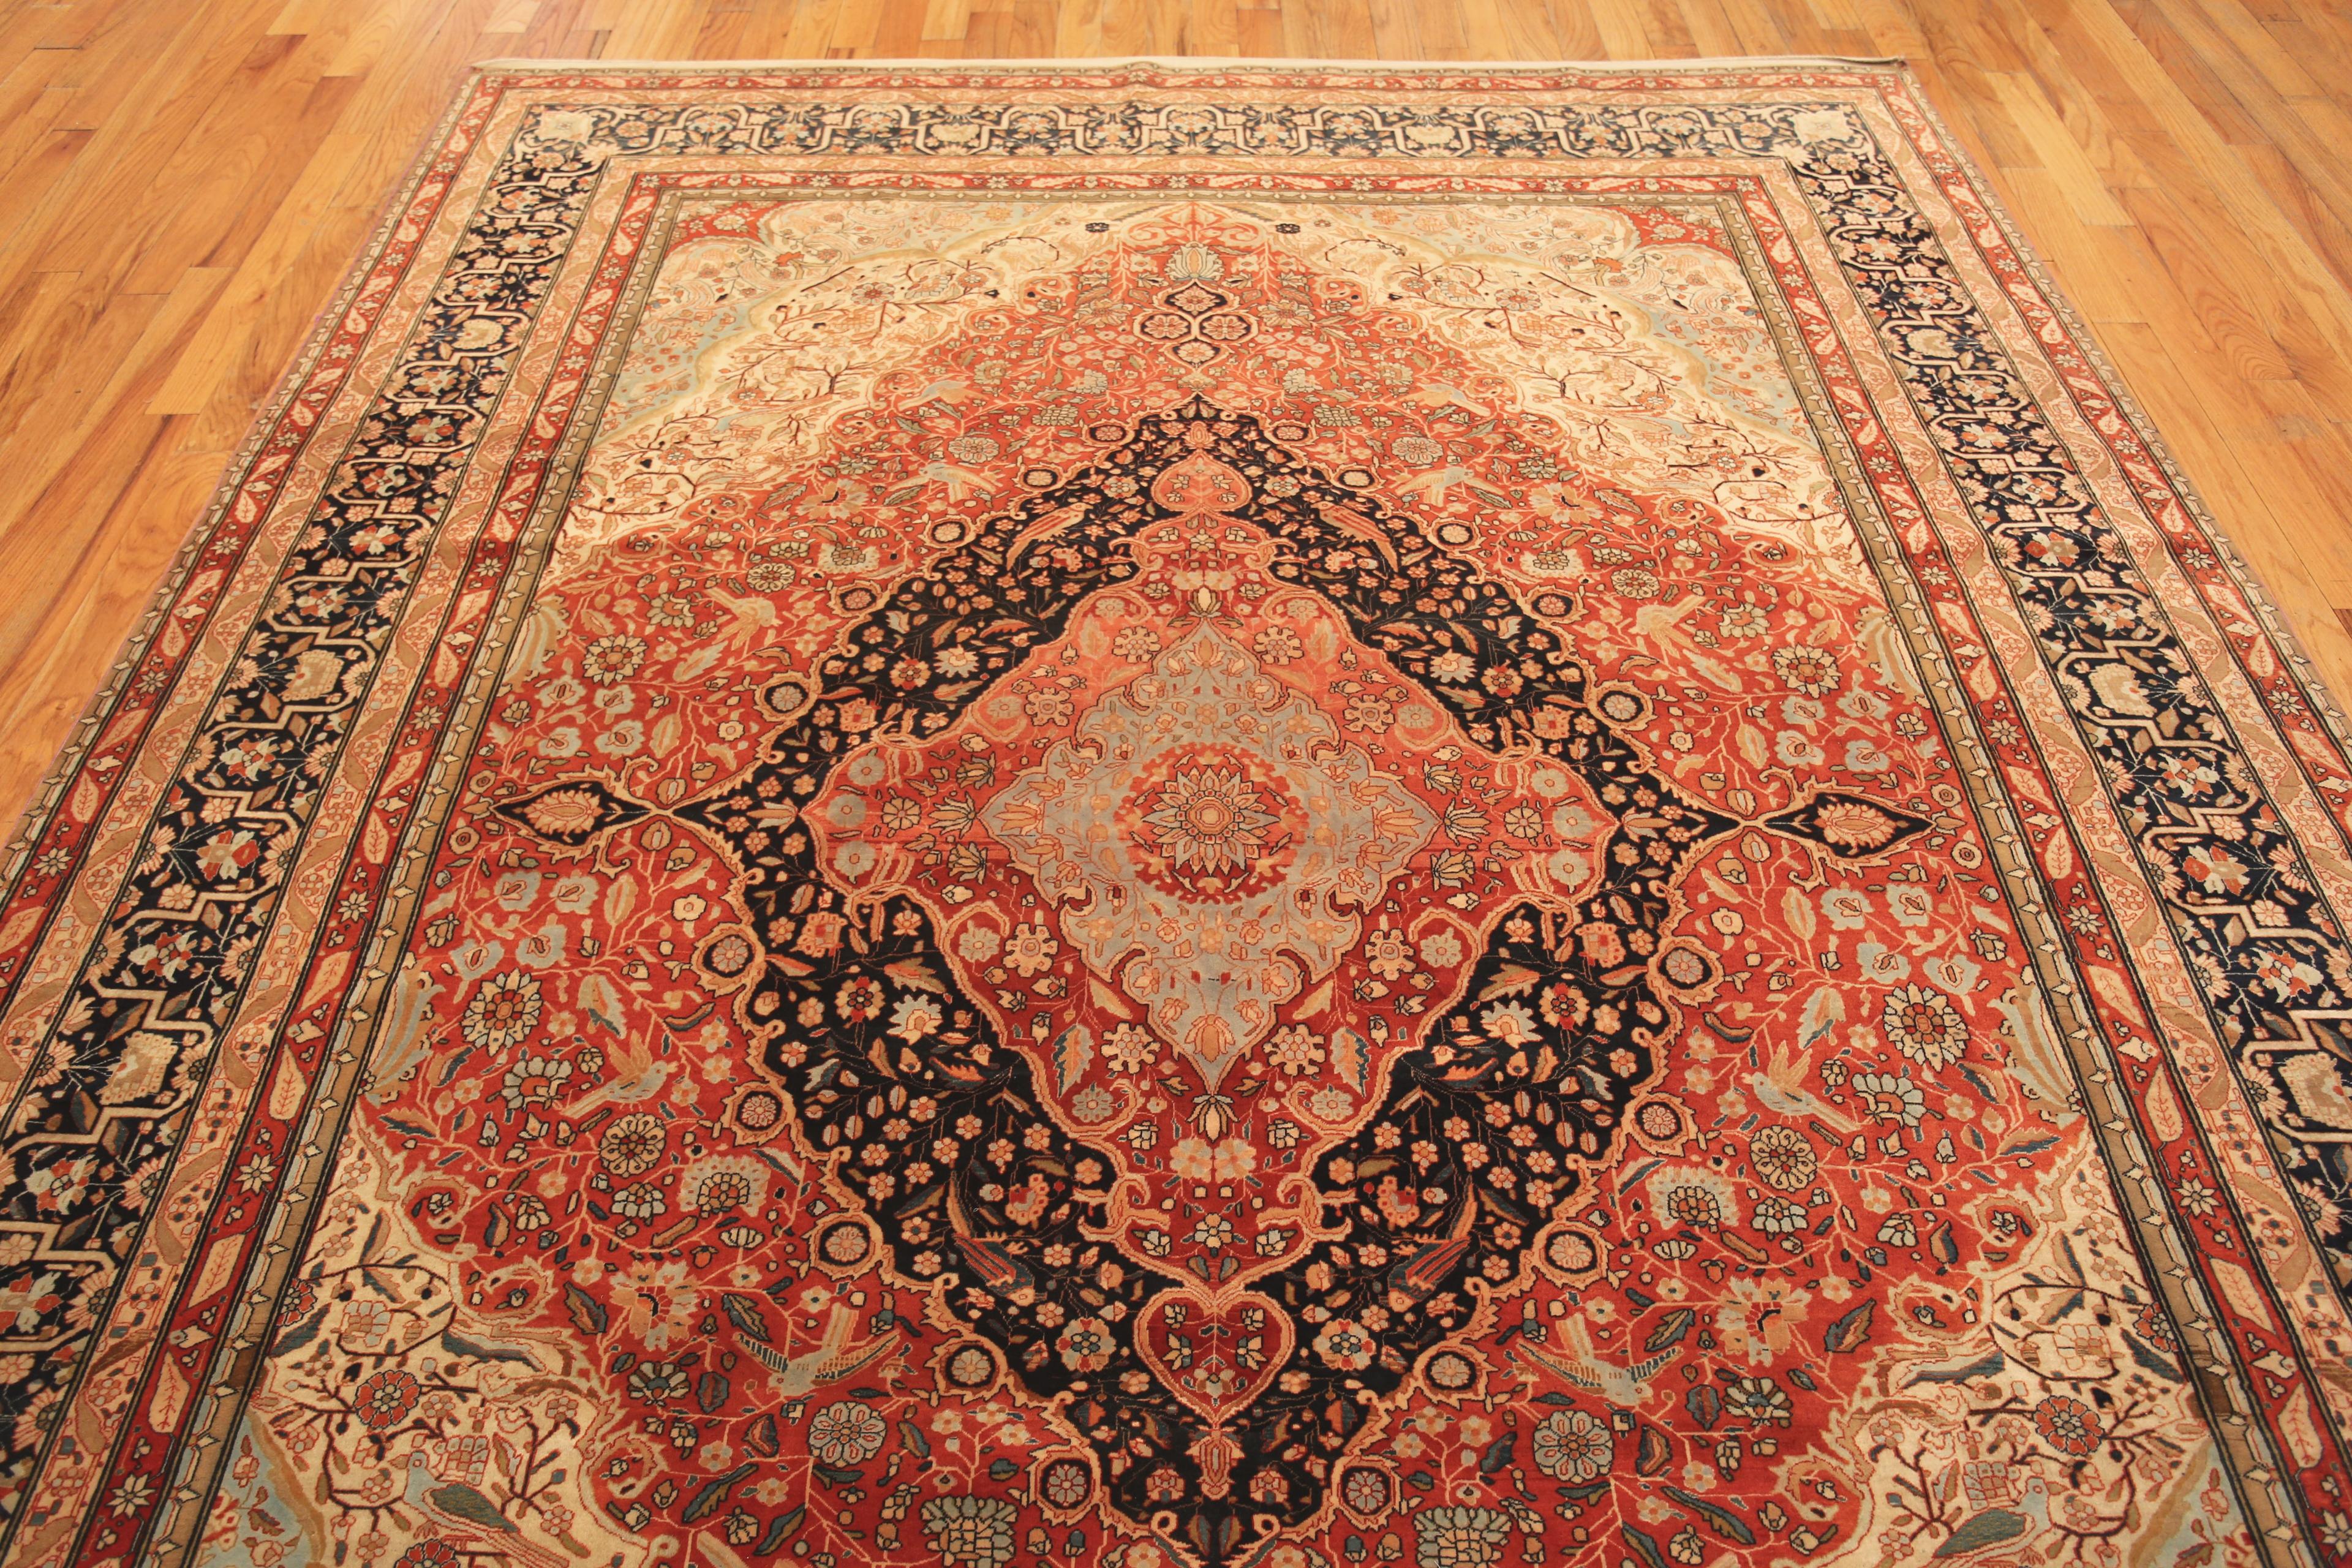 Rare Luxurious Fine Antique Persian Mohtasham Kashan Area Rug, Country of Origin : Perse, Circa date : 1880. Dimensions : 2,67 m x 3,4 m (8 ft 9 in x 11 ft 2 in)
 